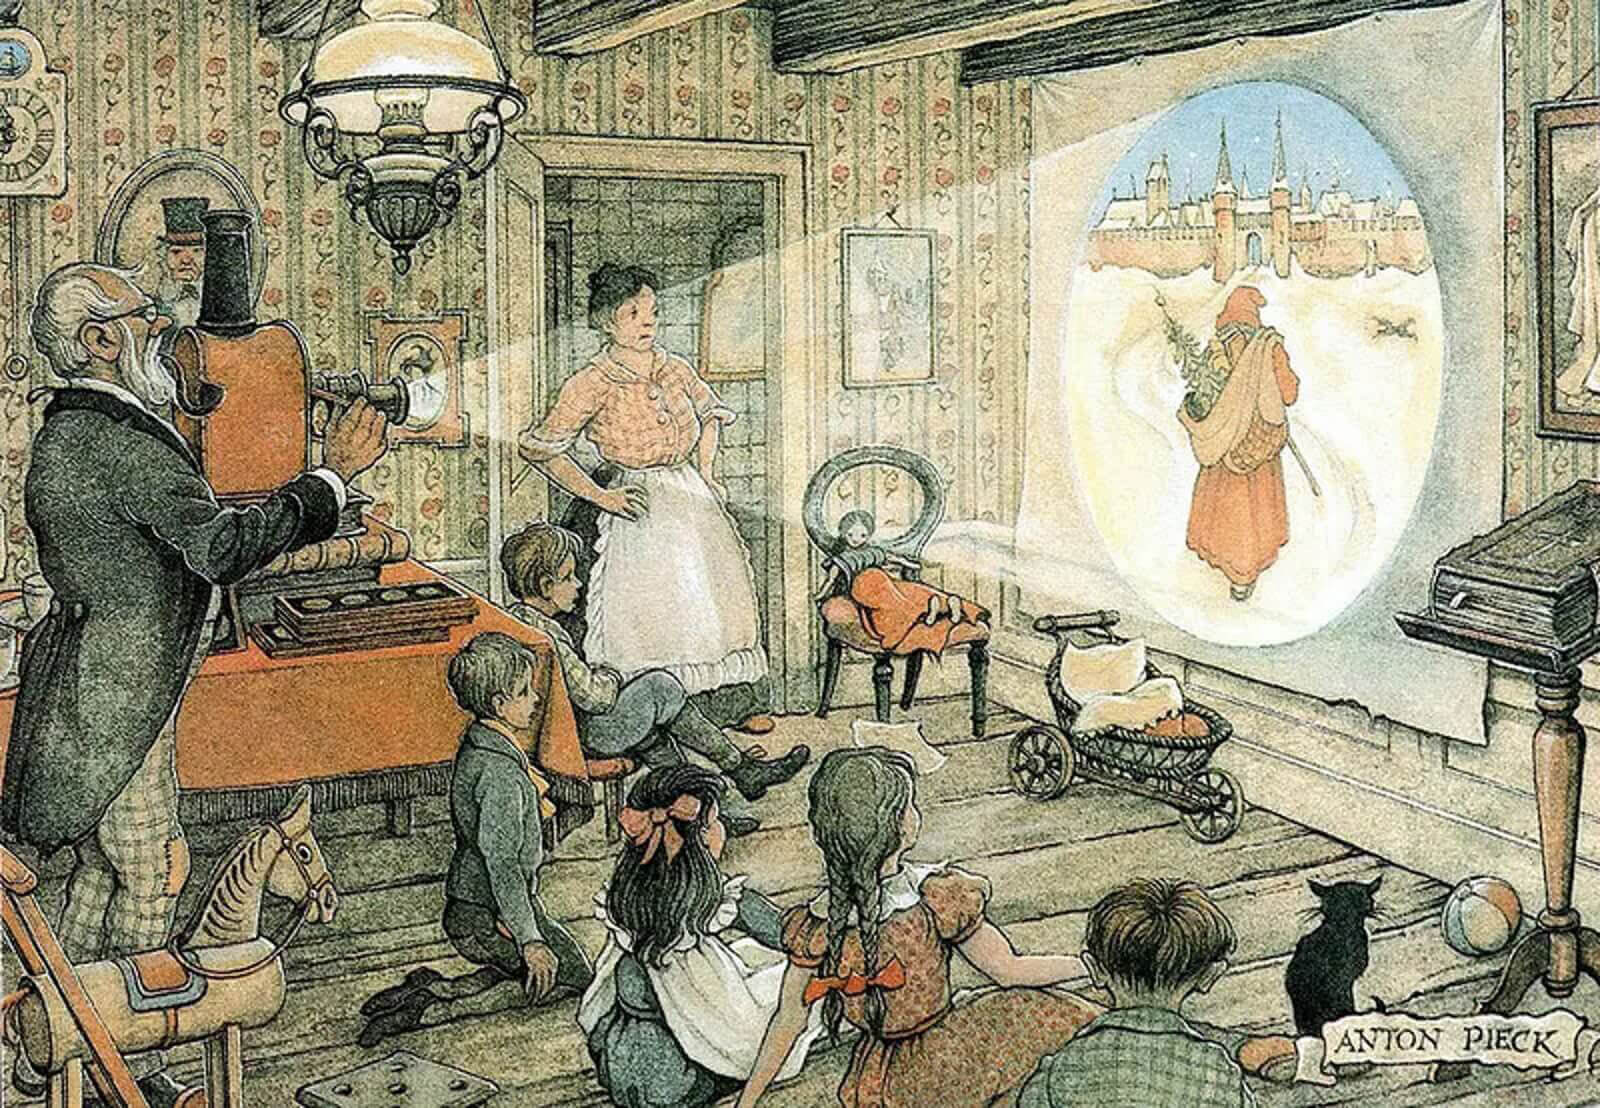 An 18th century painting of a man using a projector to show children a movie.